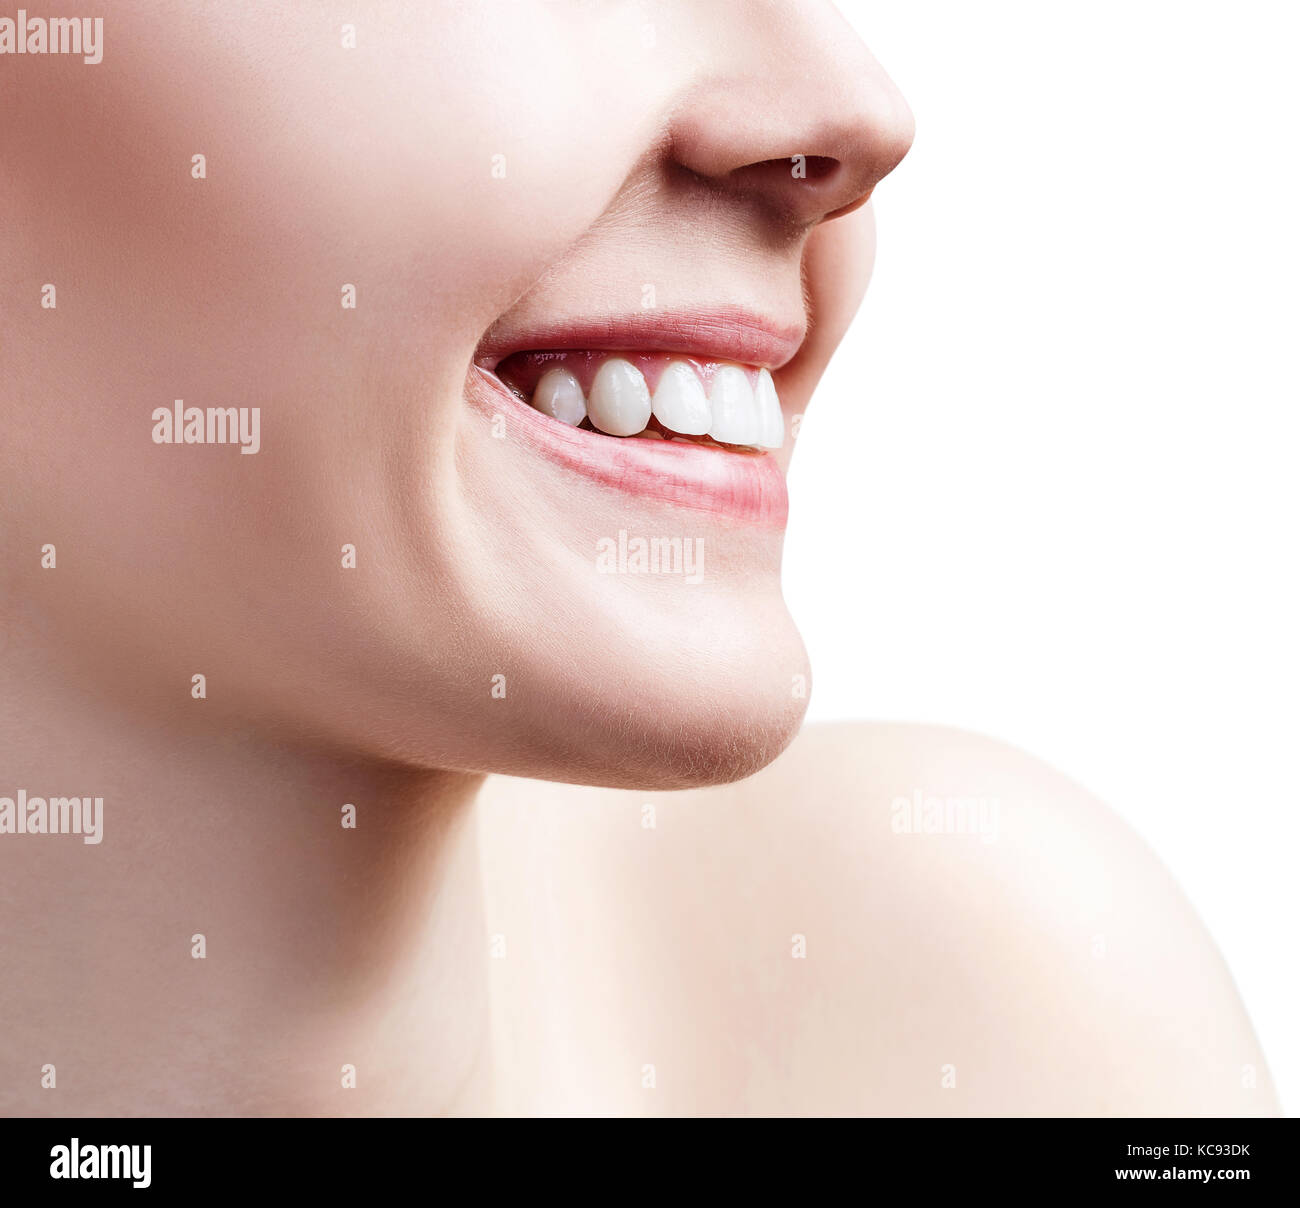 Face of young woman with healthy white teeth. Stock Photo